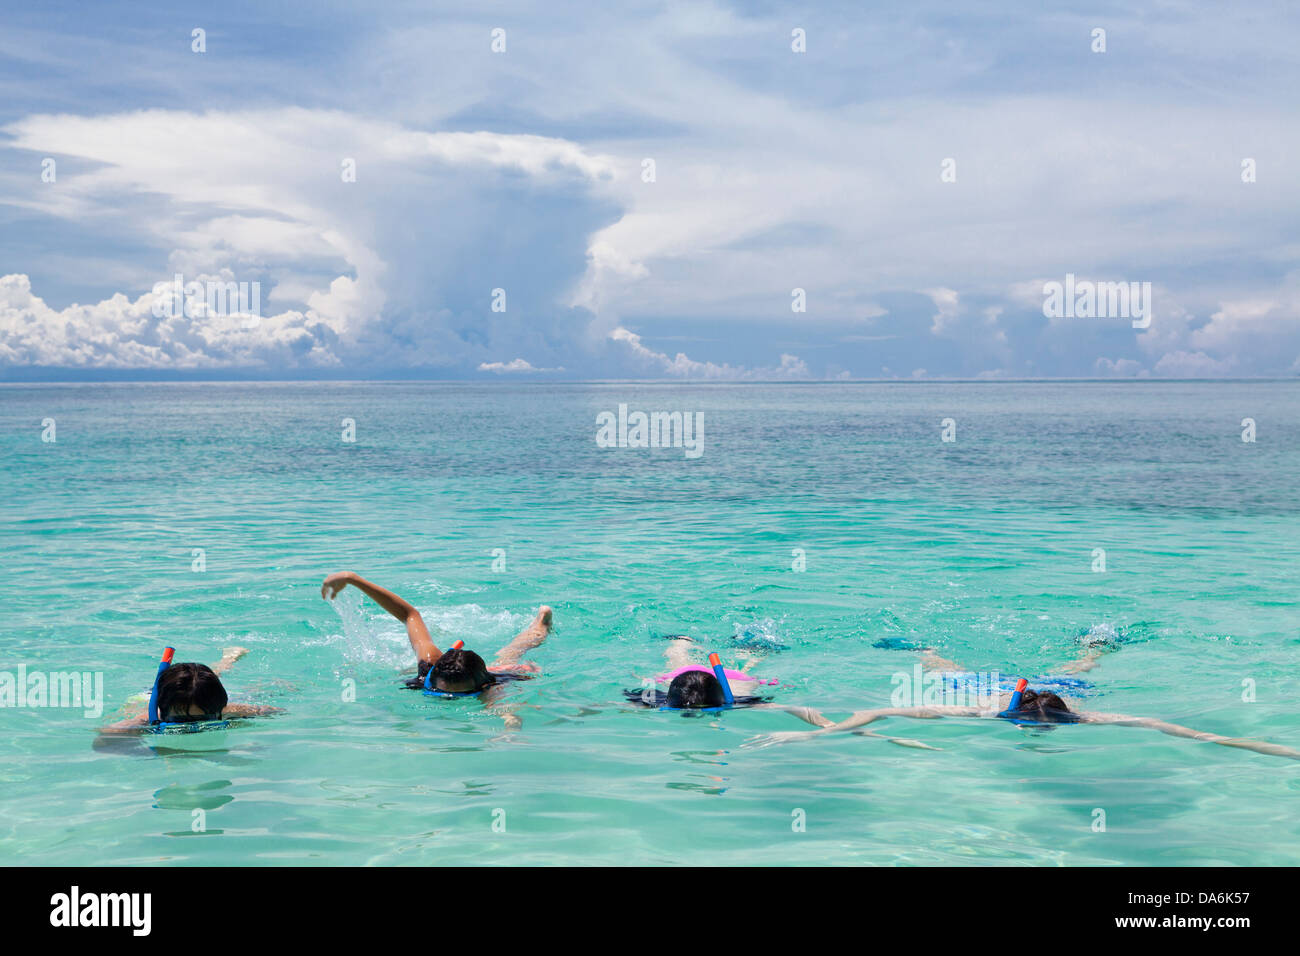 Friends snorkeling together. Stock Photo